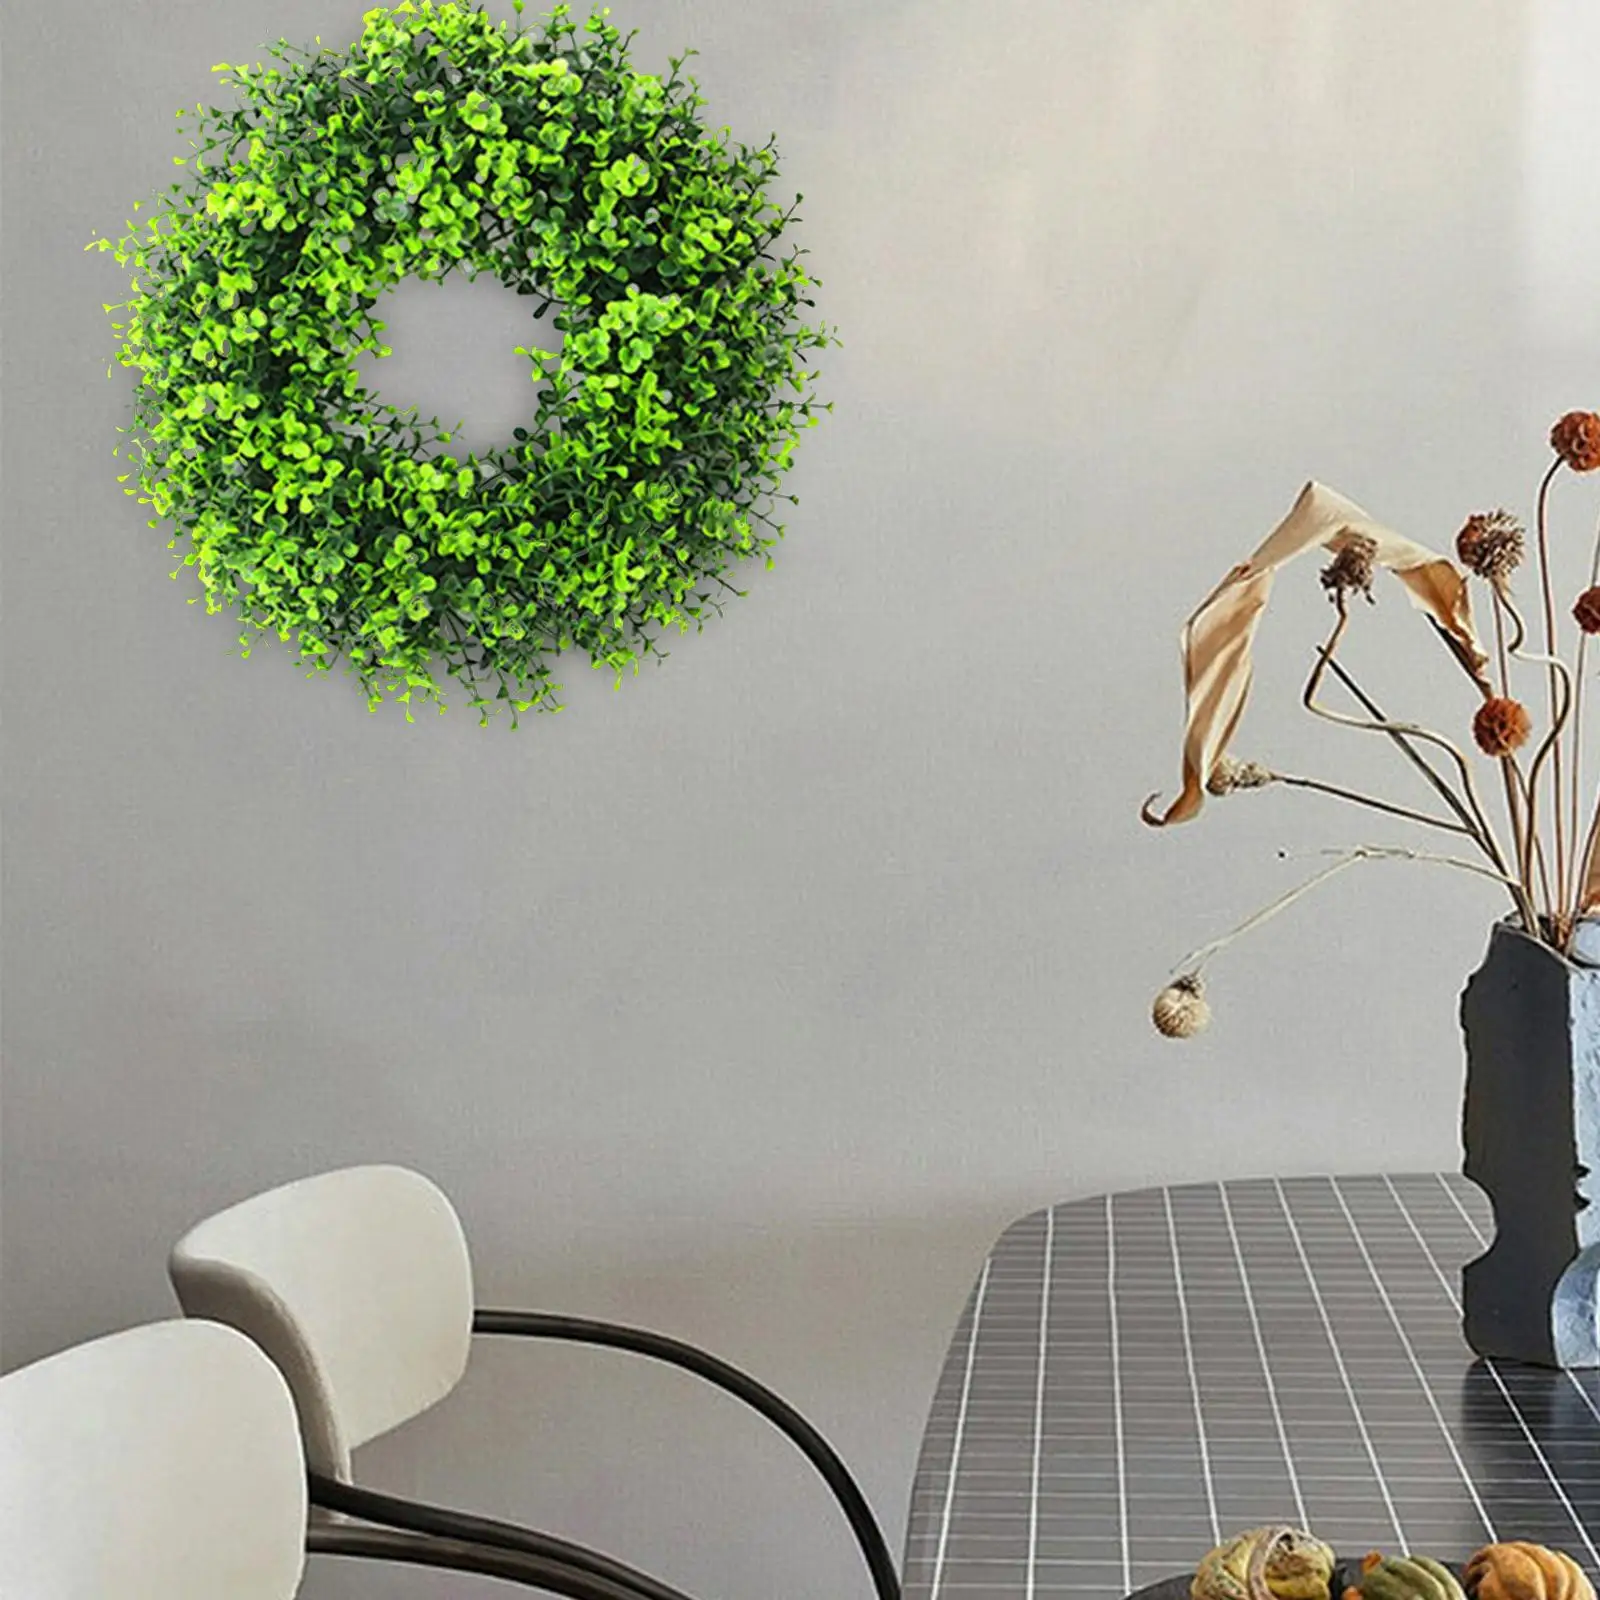 Artificial Garland Simulation Wreaths Floral Hoop Green Leaves Wreath for Office Decor Farmhouse Home Outdoor Decoration